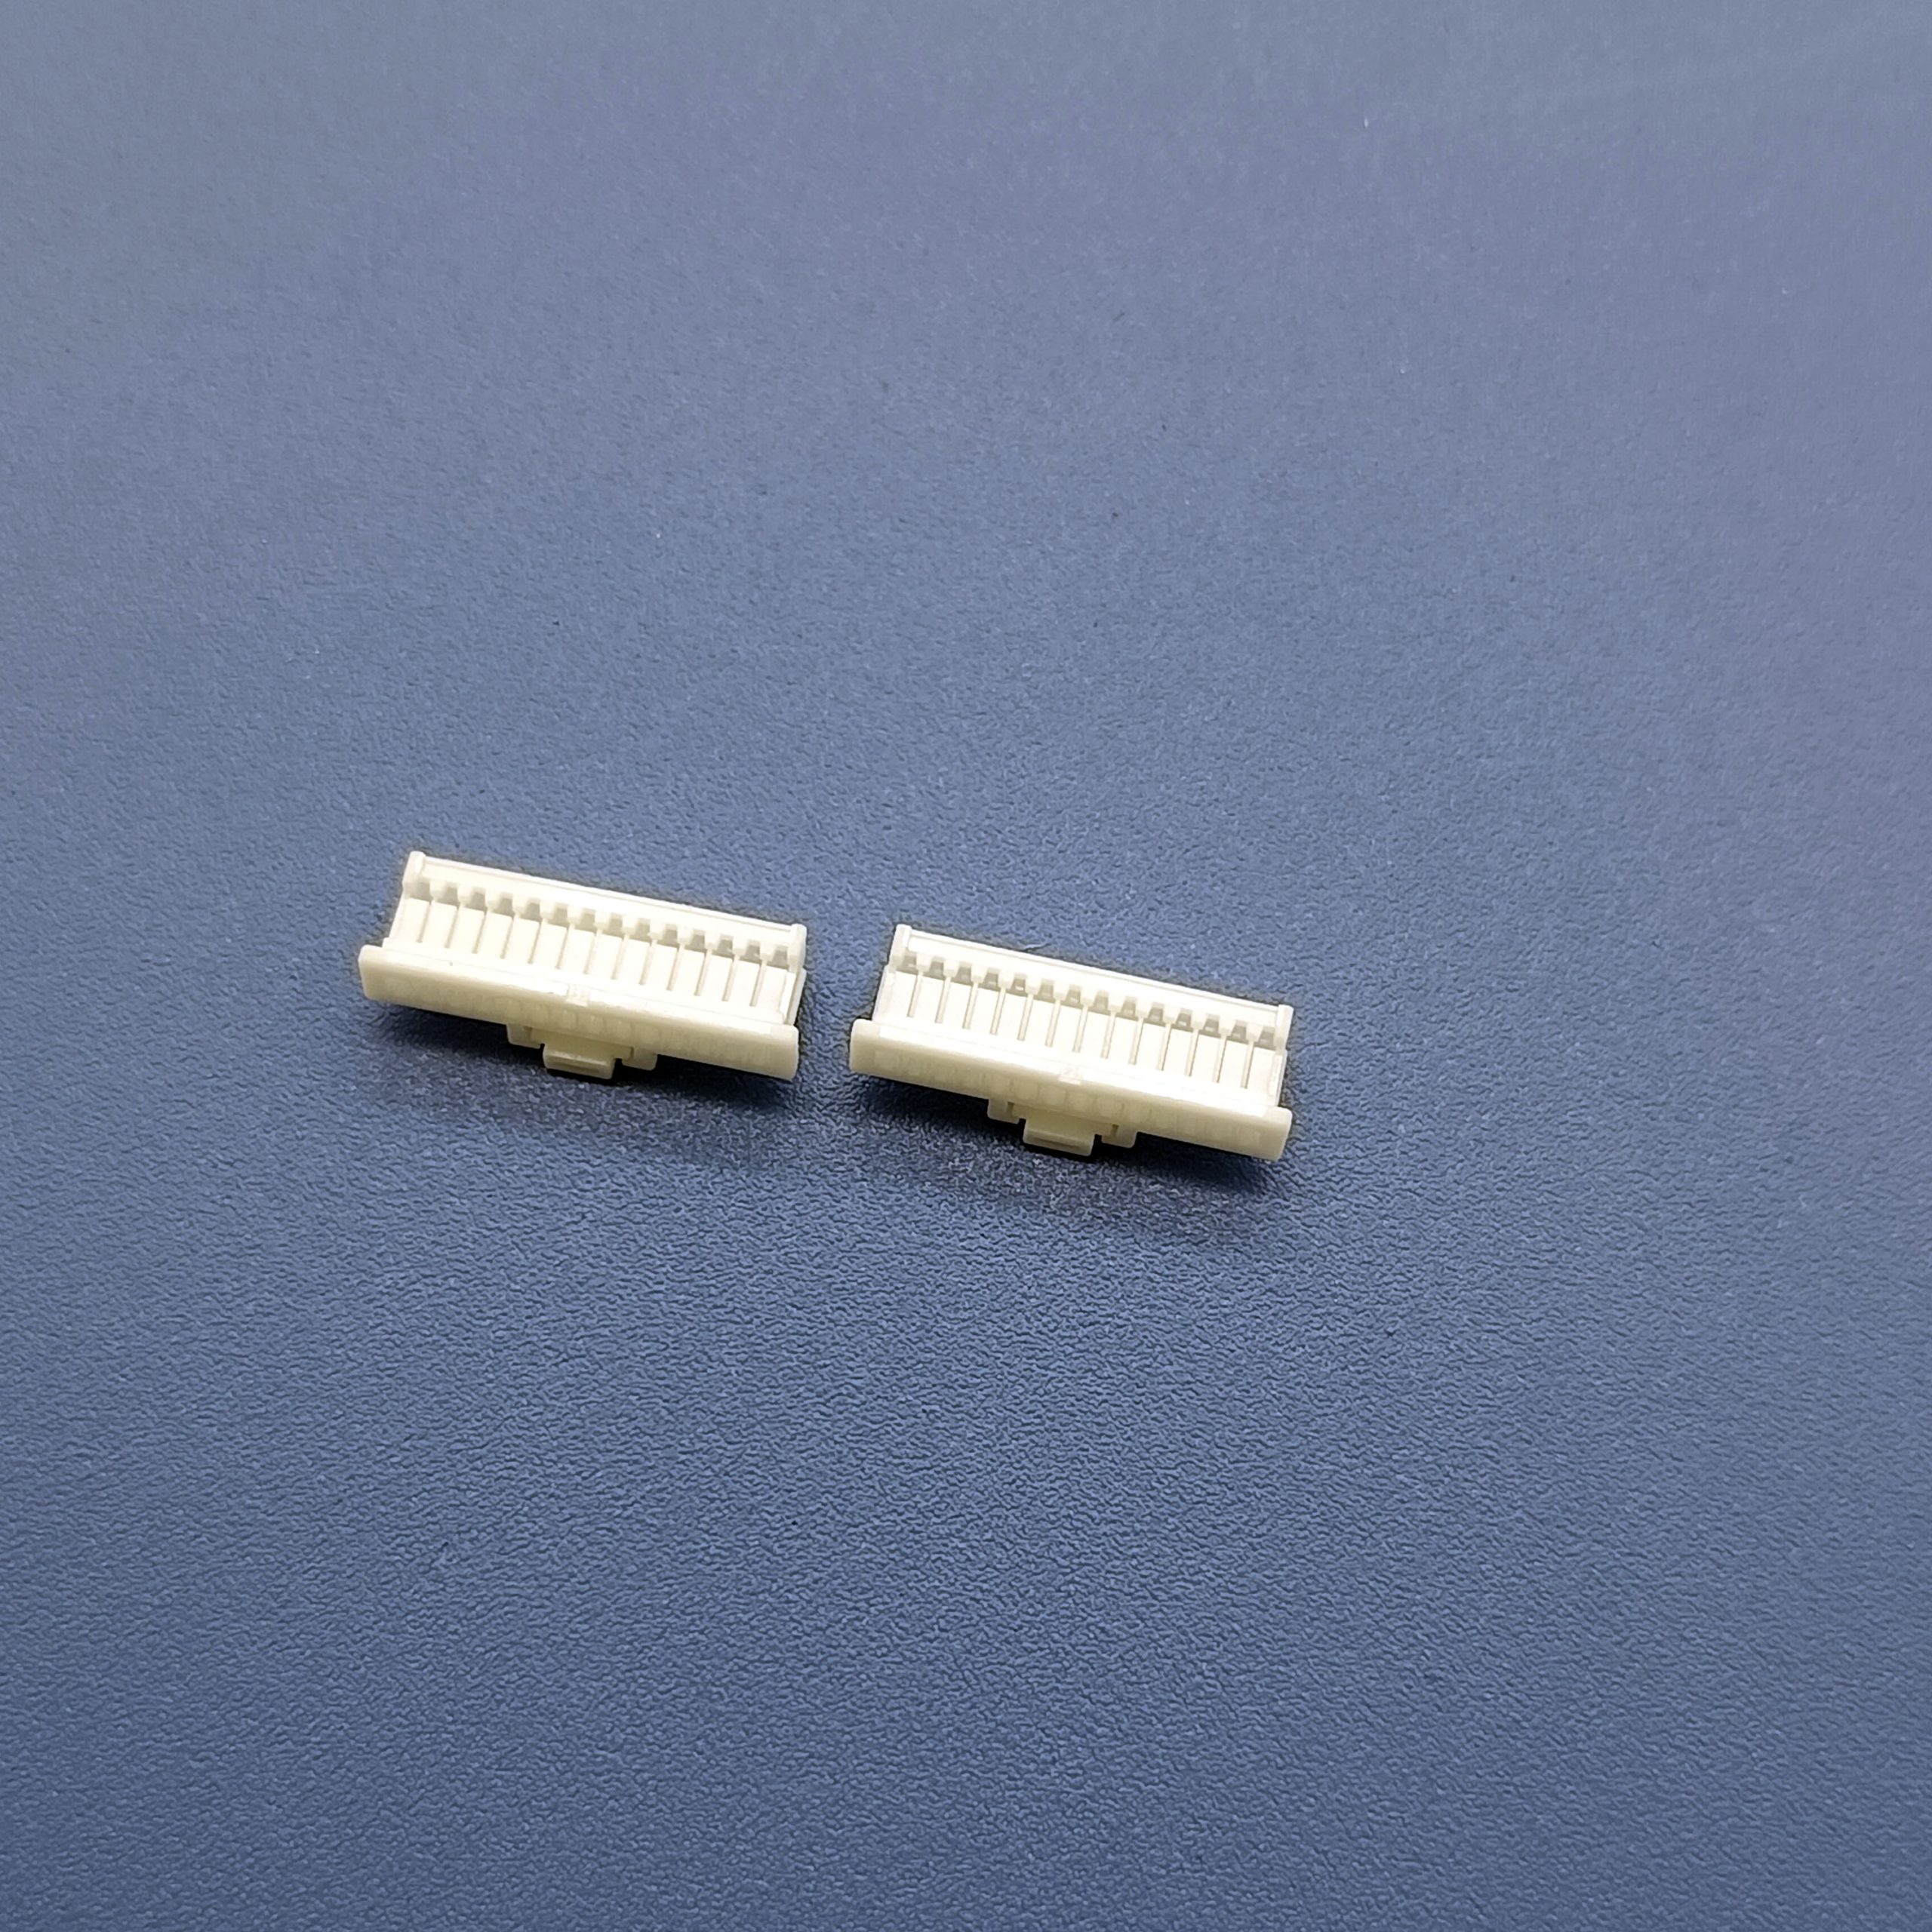 Molex 501330 is a versatile connector known for its reliable performance. It's utilized in various electronic applications, offering secure connections and consistent functionality for demanding projects. 